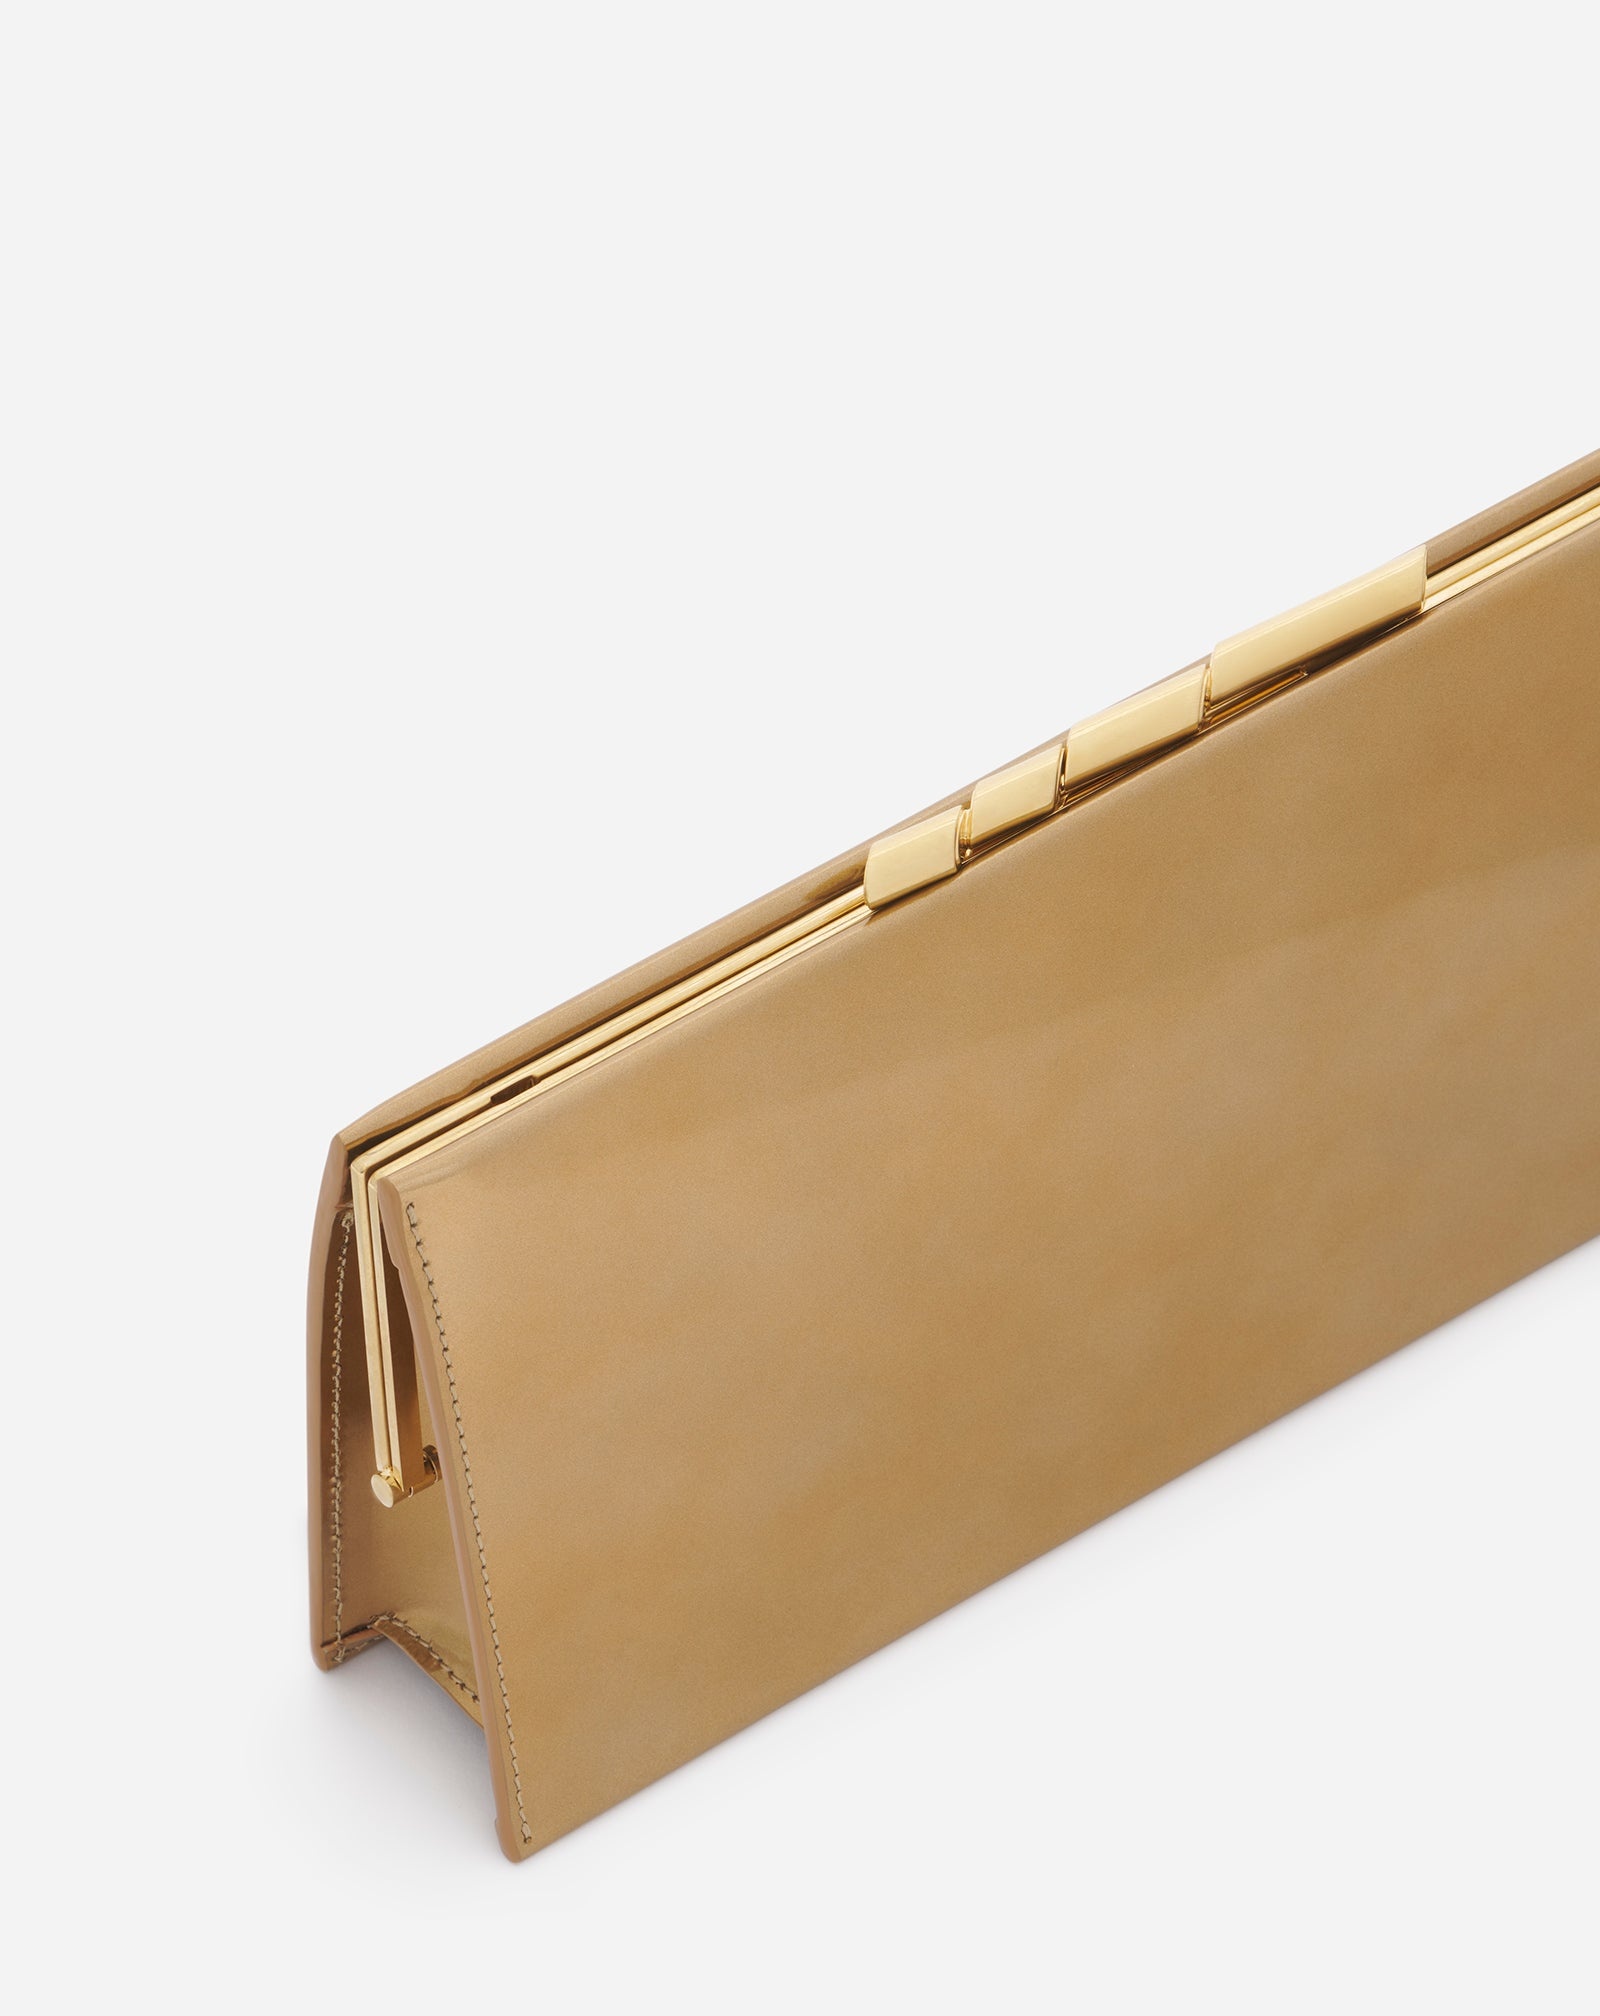 SEQUENCE BY LANVIN METALLIC LEATHER CLUTCH BAG - 5